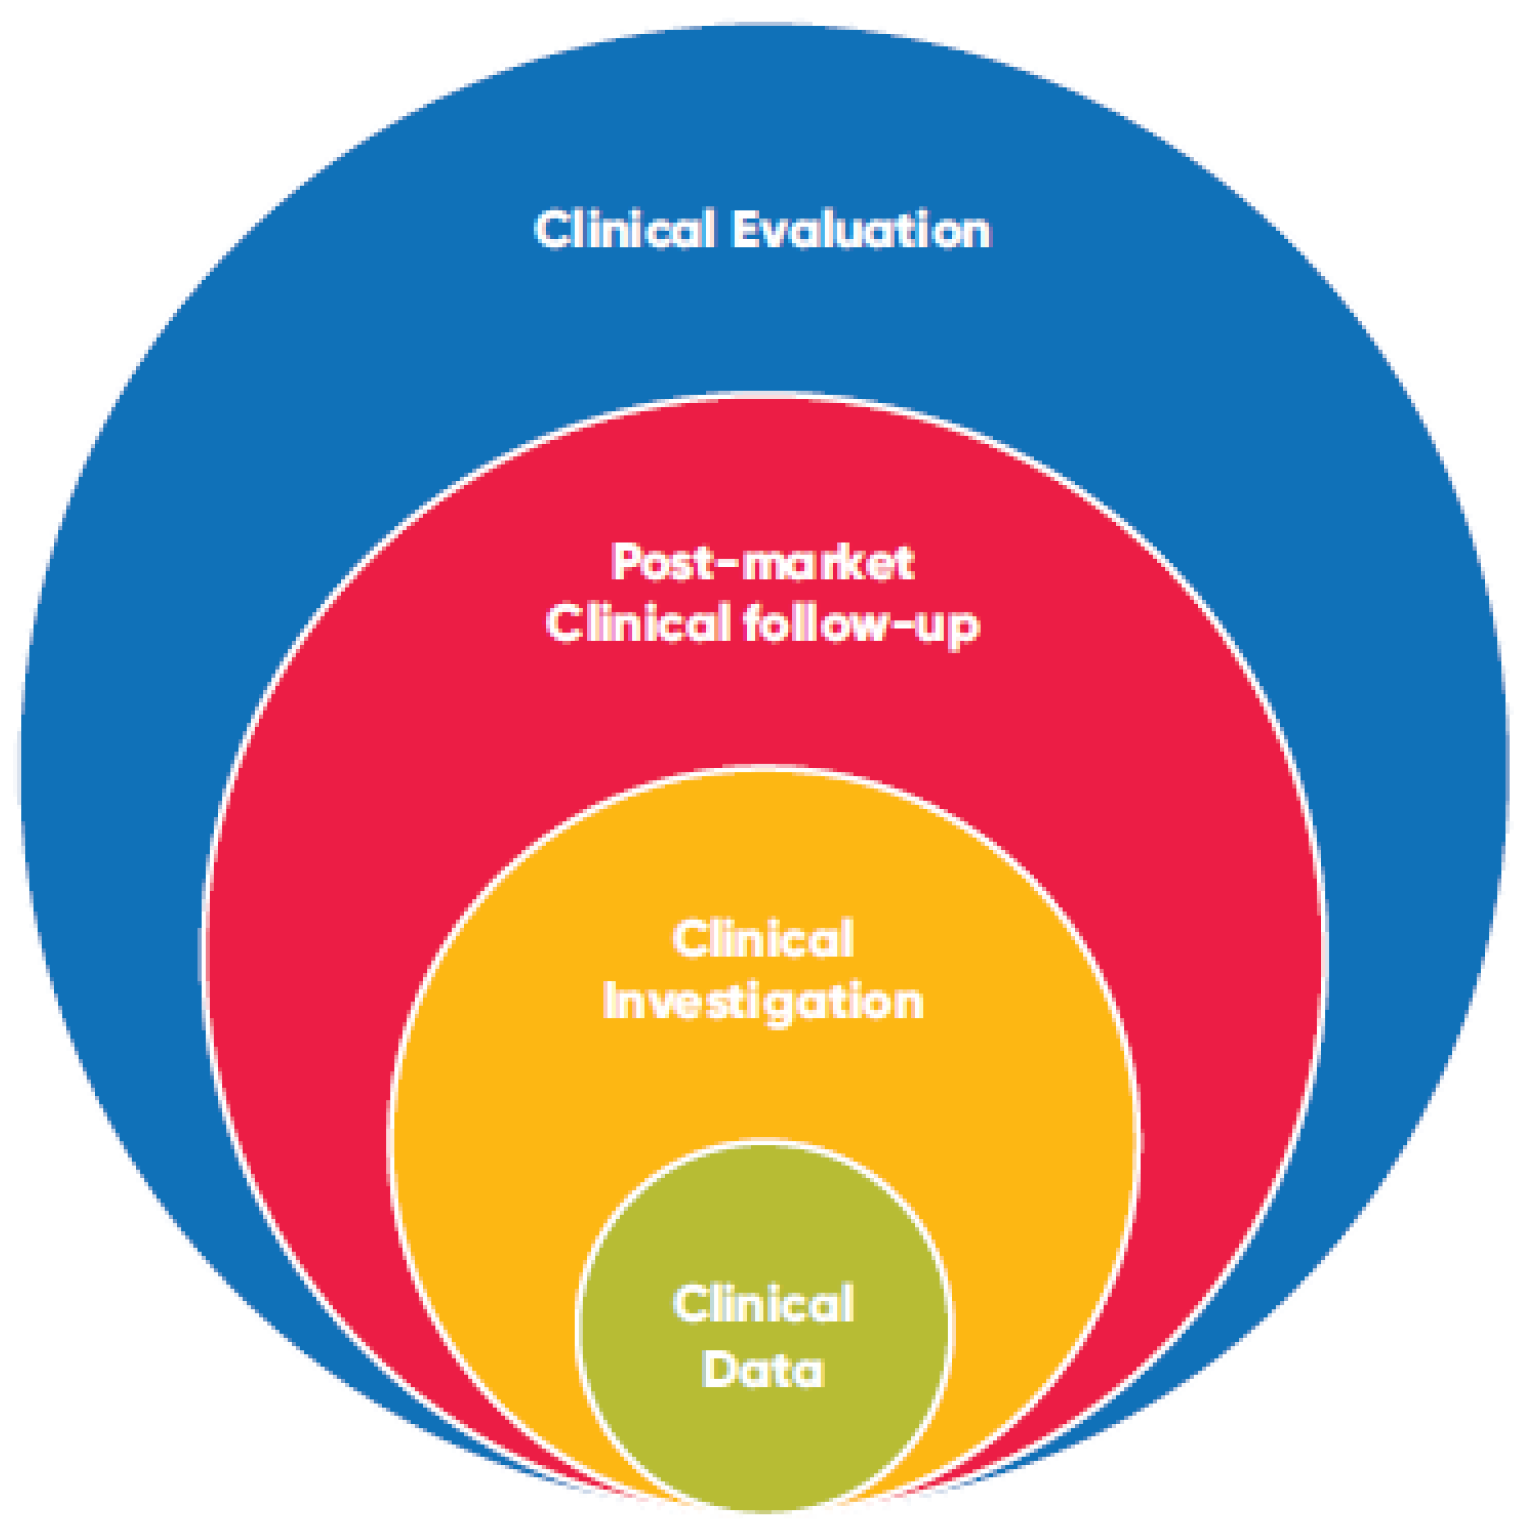 Clinical data elements